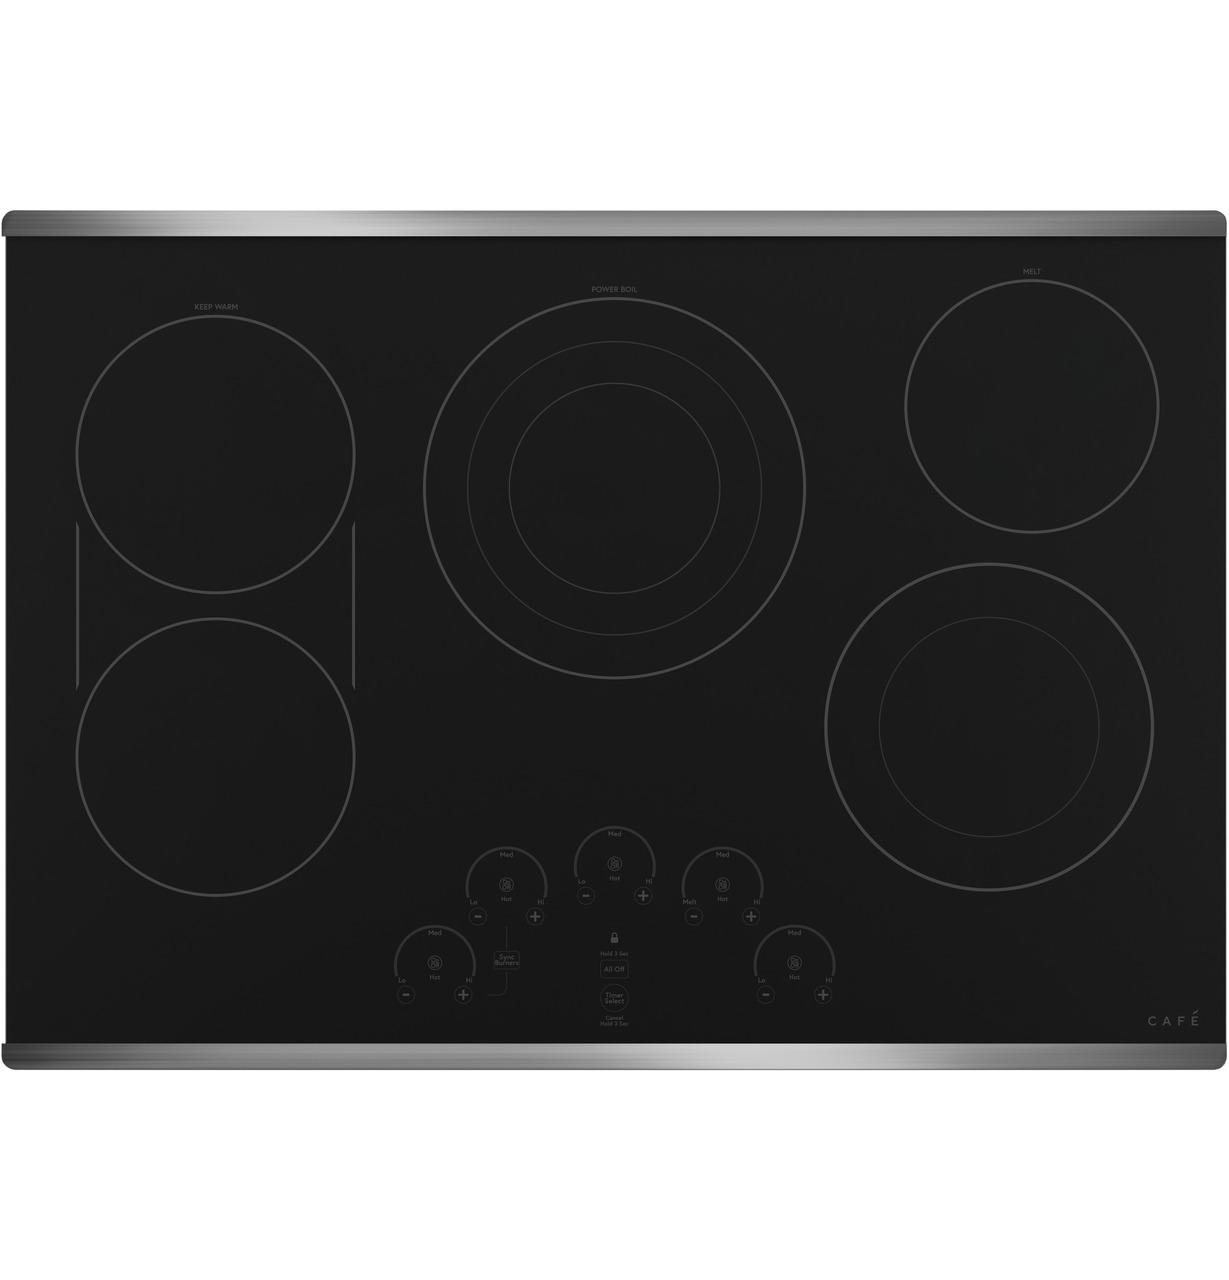 Caf(eback)™ 30" Touch-Control Electric Cooktop